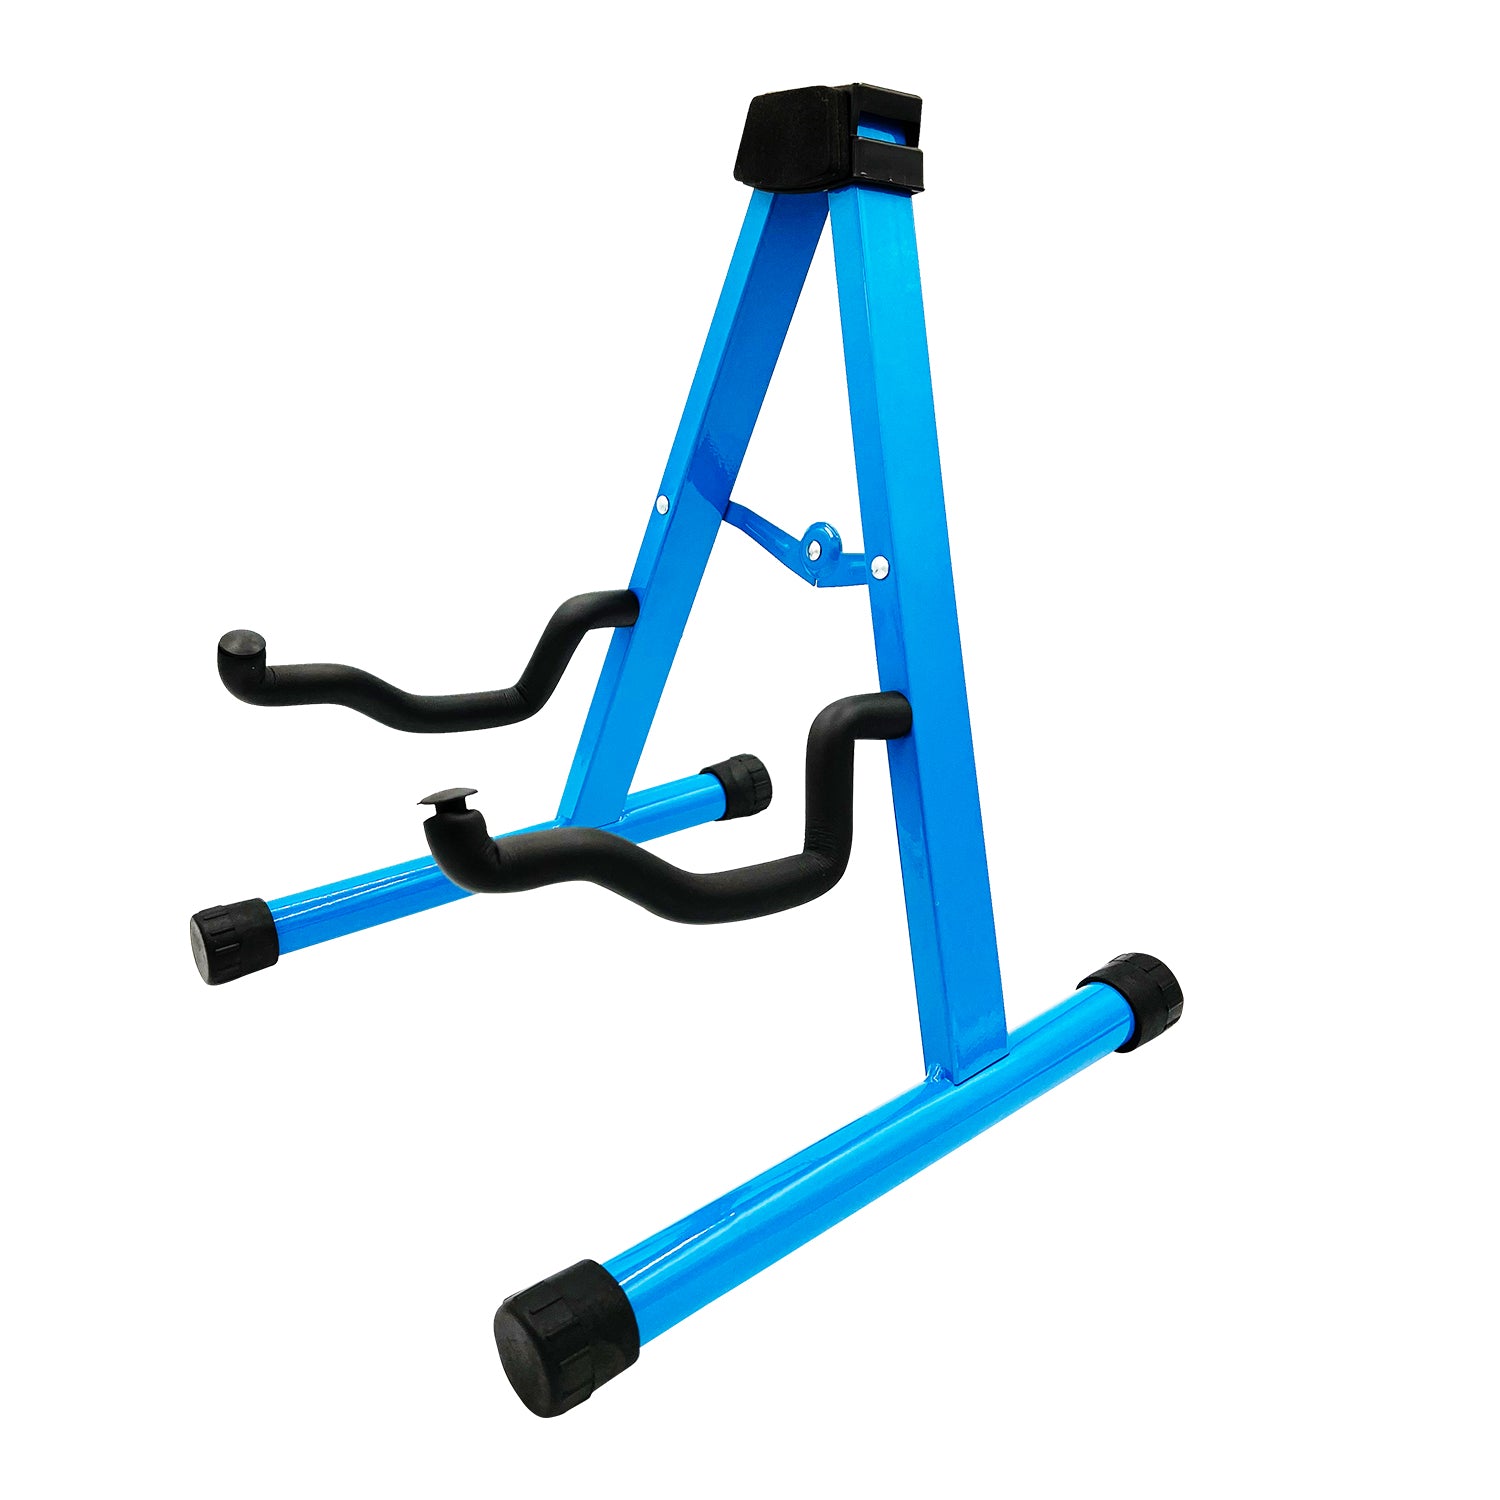 5 Core Guitar Stand 1 Piece Blue Adjustable Guitar Folding A-Frame Stand for Acoustic and Electric Guitars with Non-Slip Rubber and Soft Foam Arms - GSS BLU